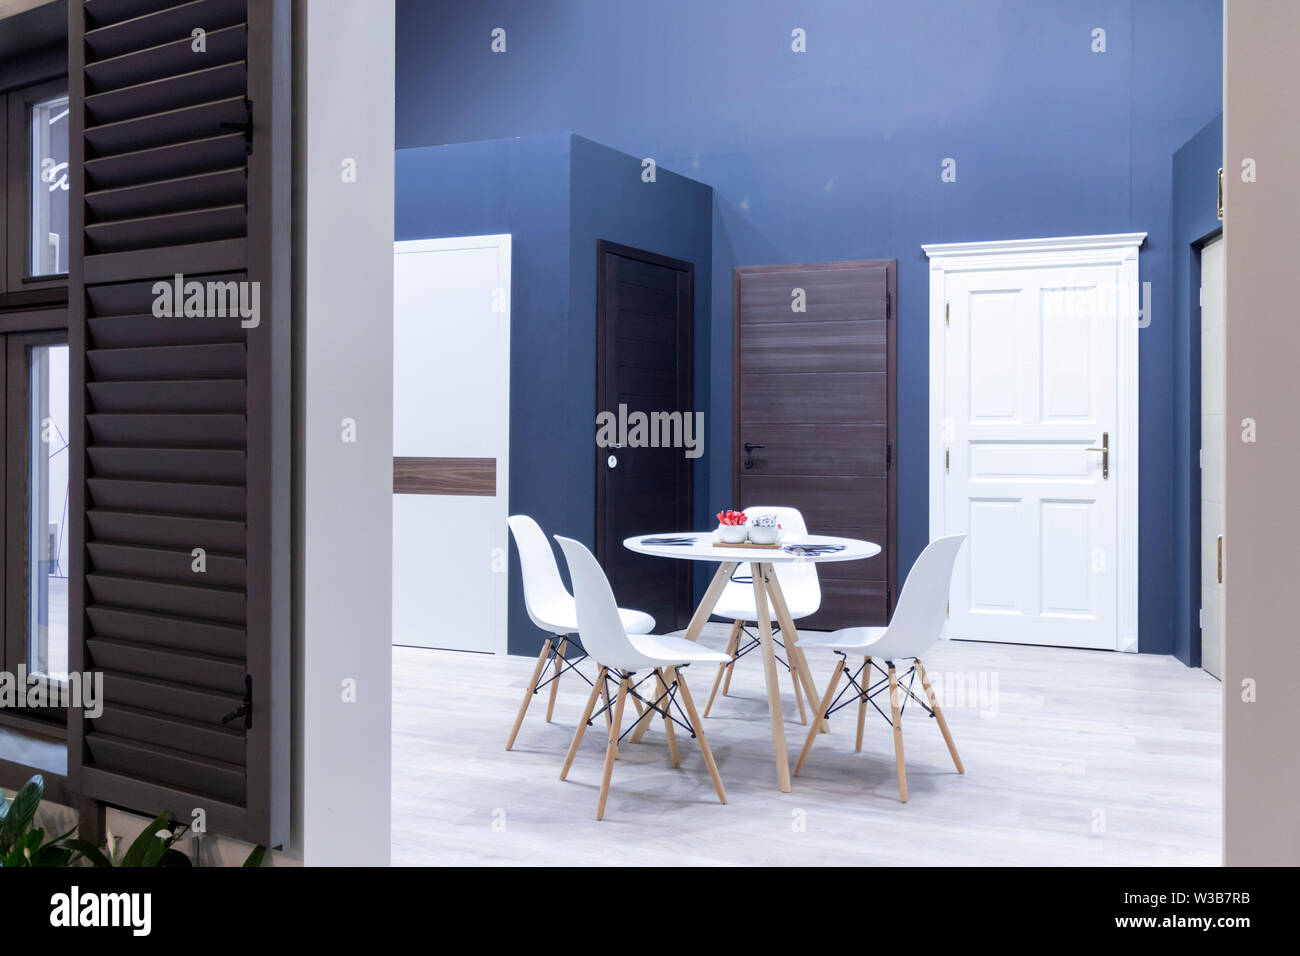 A collection of doors on display in a home depot. White floor, table with four chairs and decoration. Stock Photo